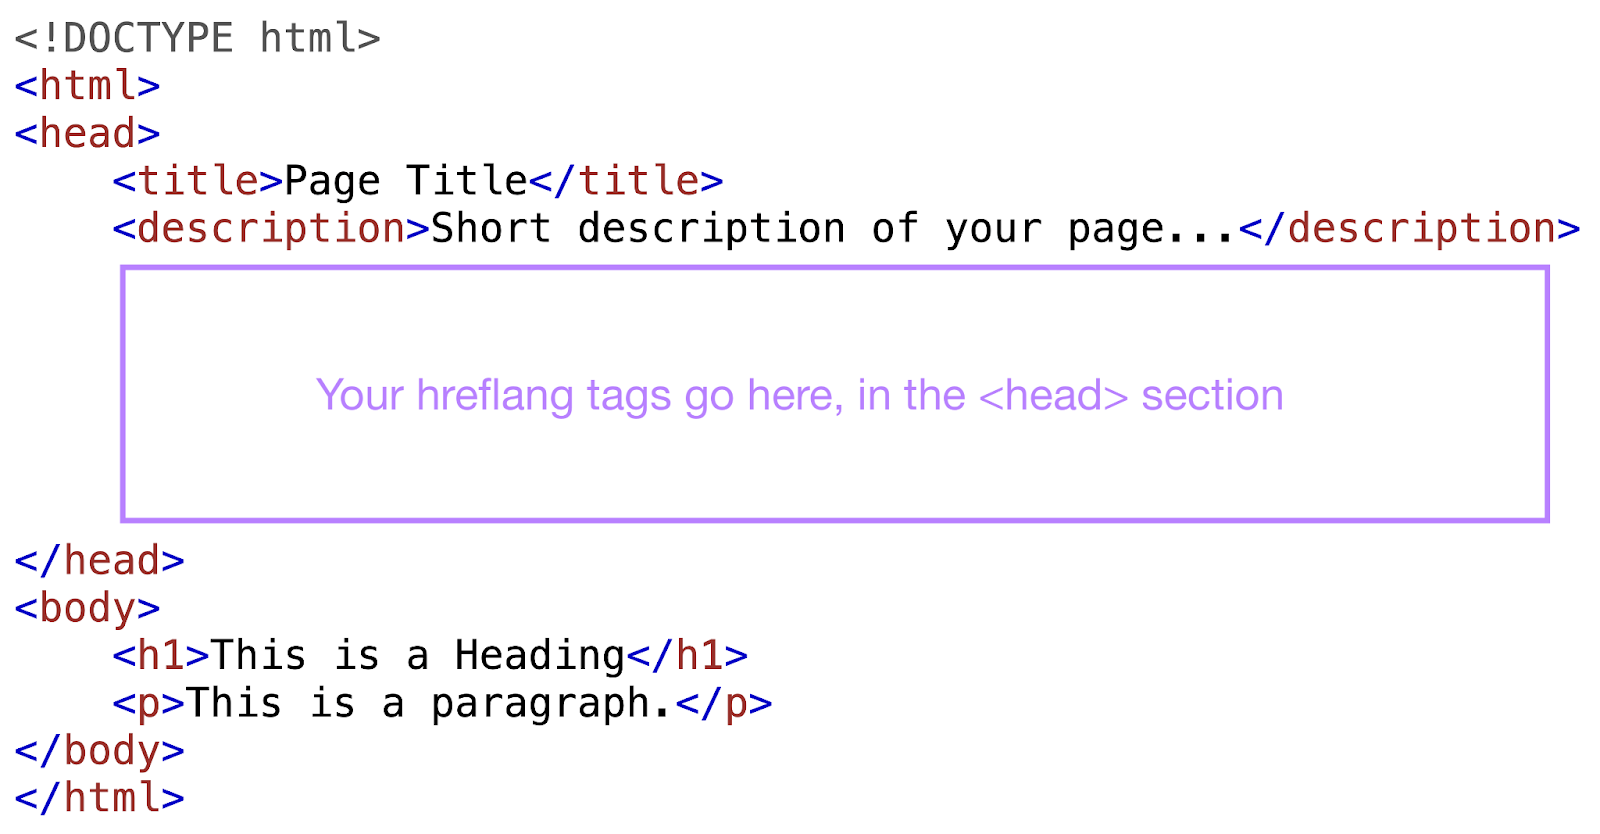 Where to place hreflang tags